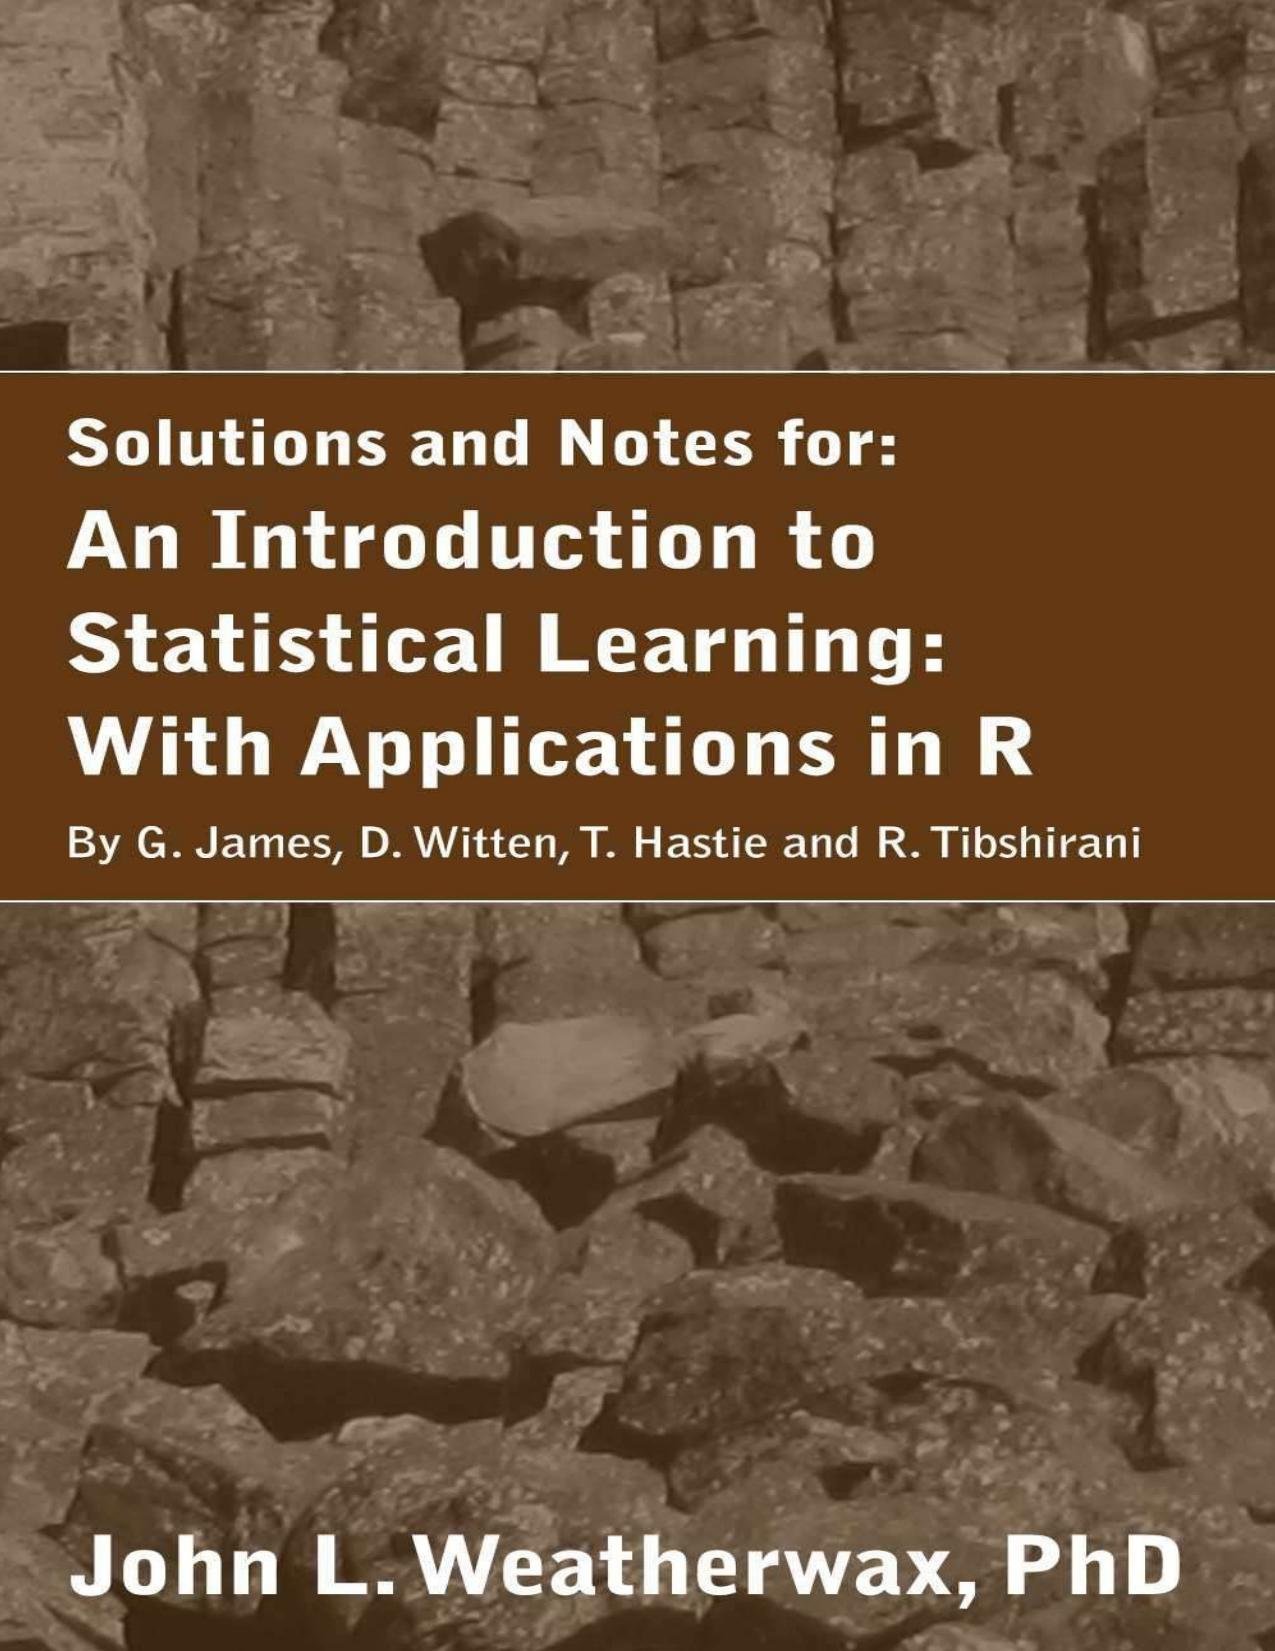 Solution Manual and Notes for: An Introduction to Statistical Learning: with Applications in R by John Weatherwax